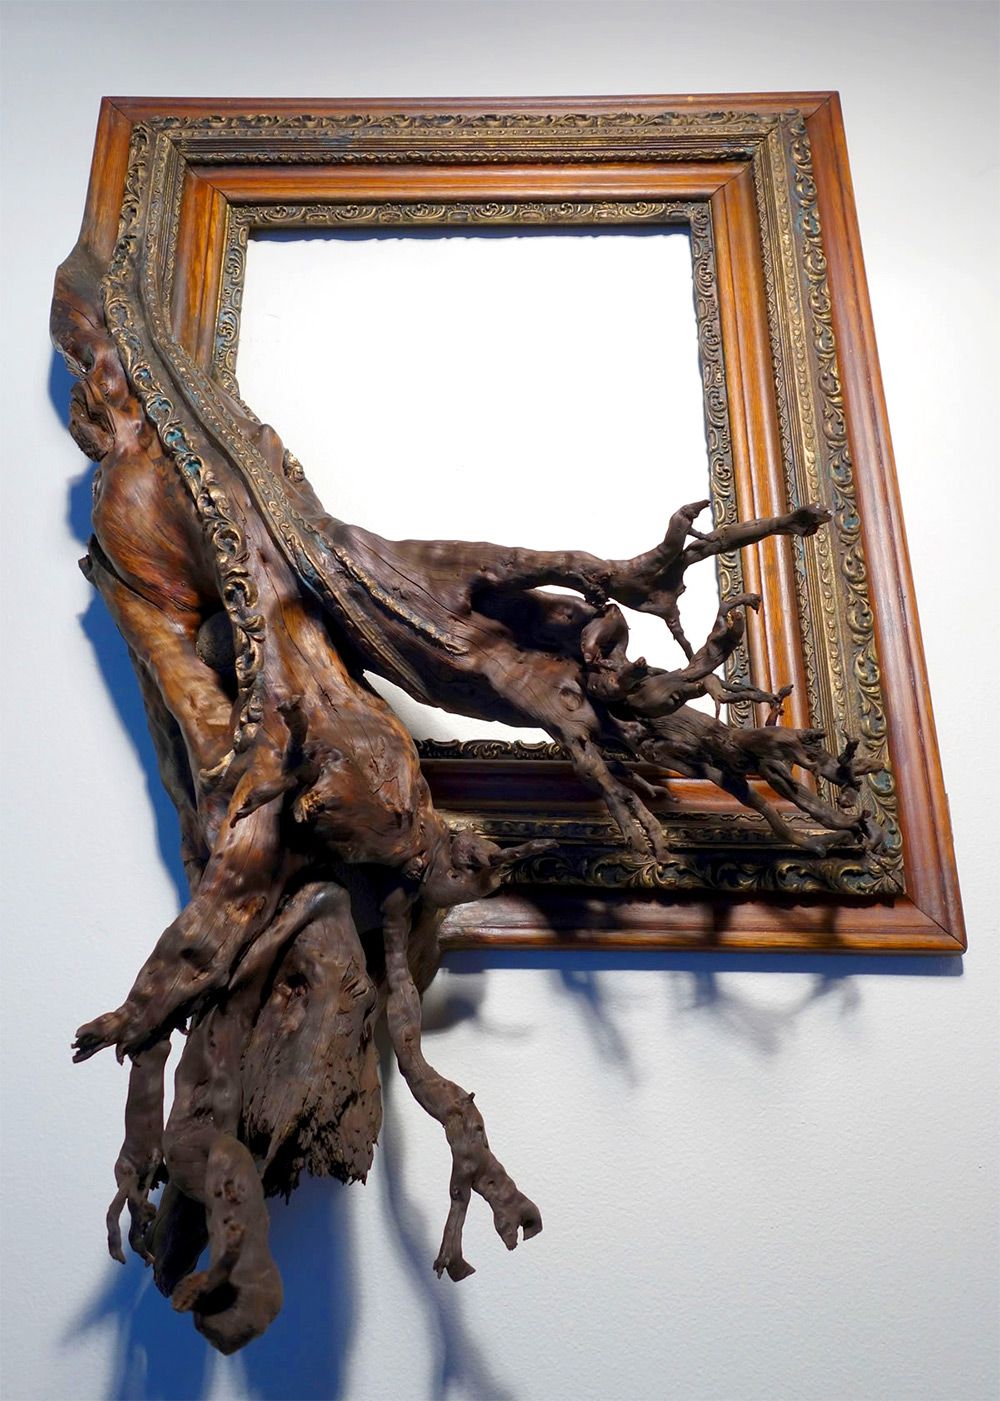 Tree Roots And Branches Fused With Ornate Picture Frames By Darryl Cox 3